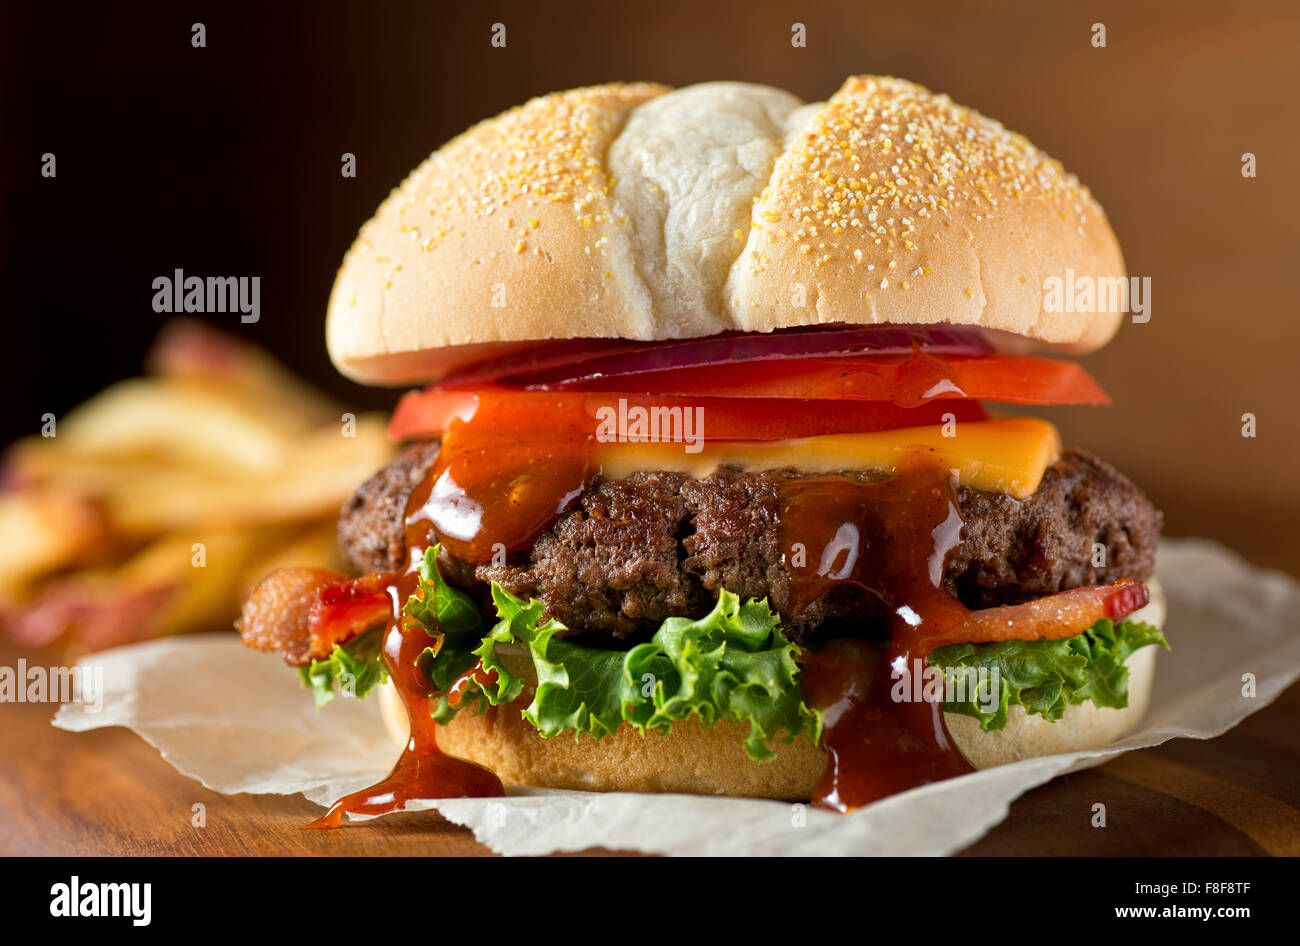 A delicious messy homemade bacon cheeseburger with barbecue sauce, lettuce, tomato, and onion. Stock Photo